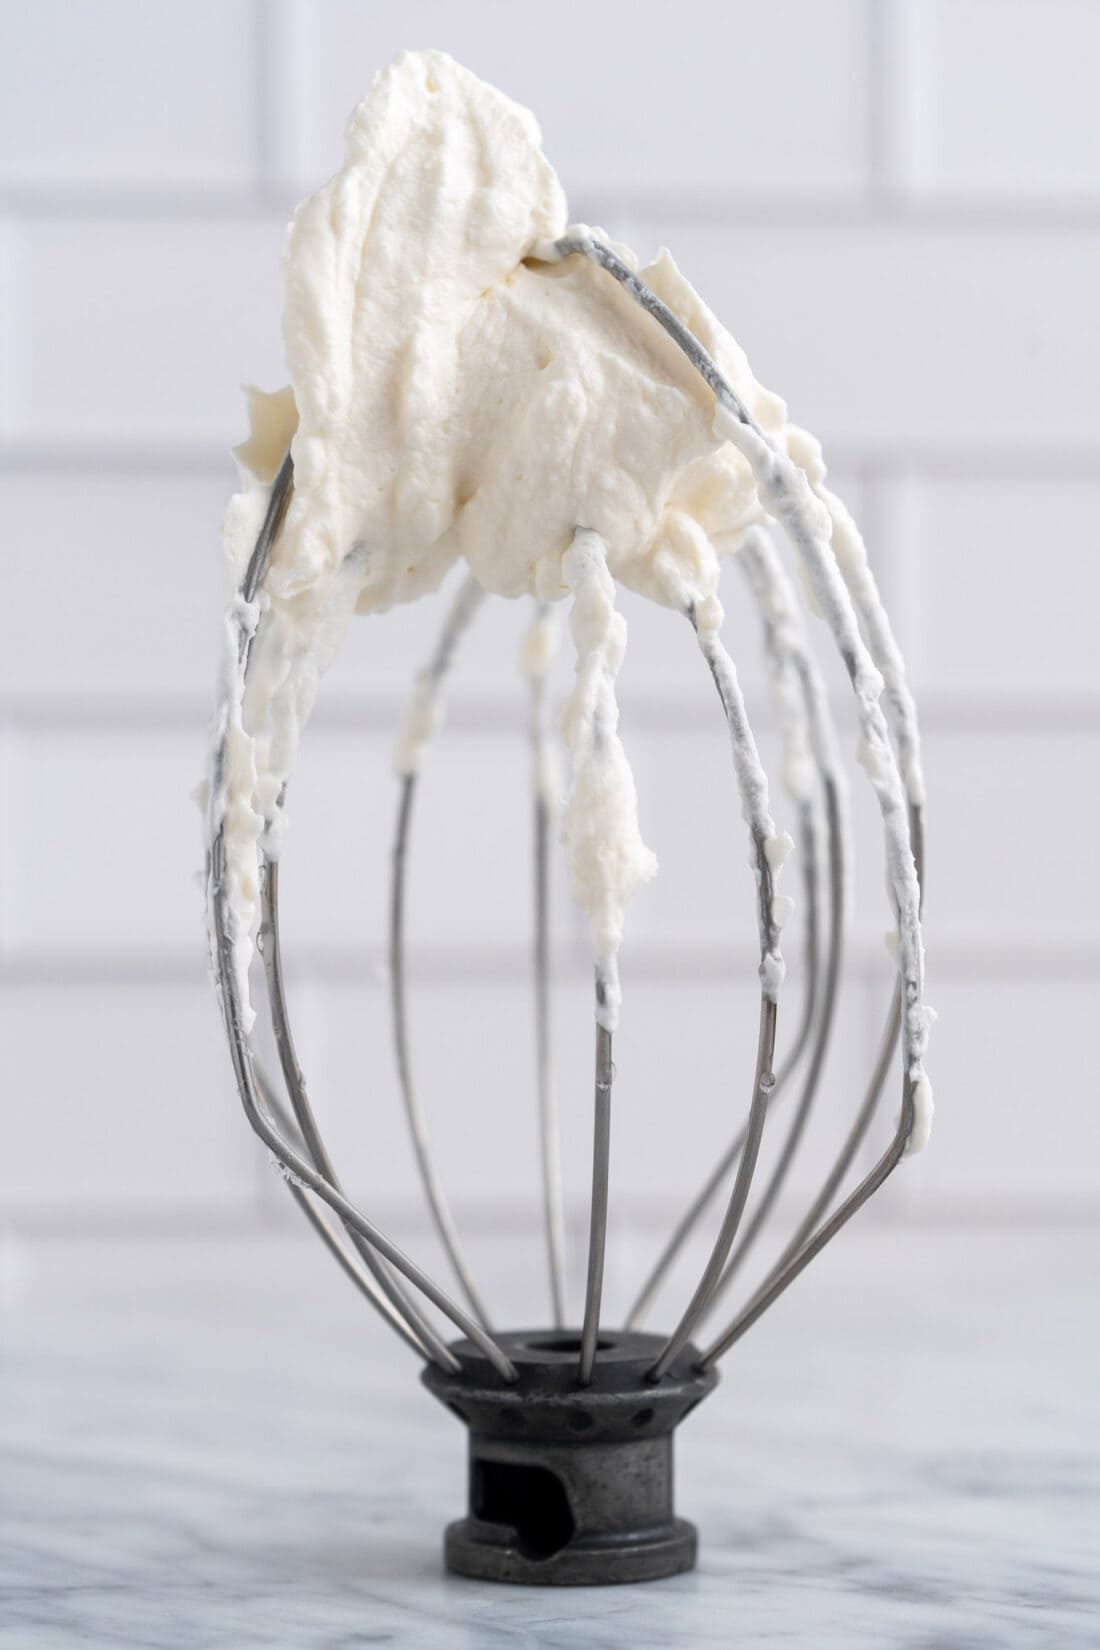 Stabilized Whipped Cream on a whisk